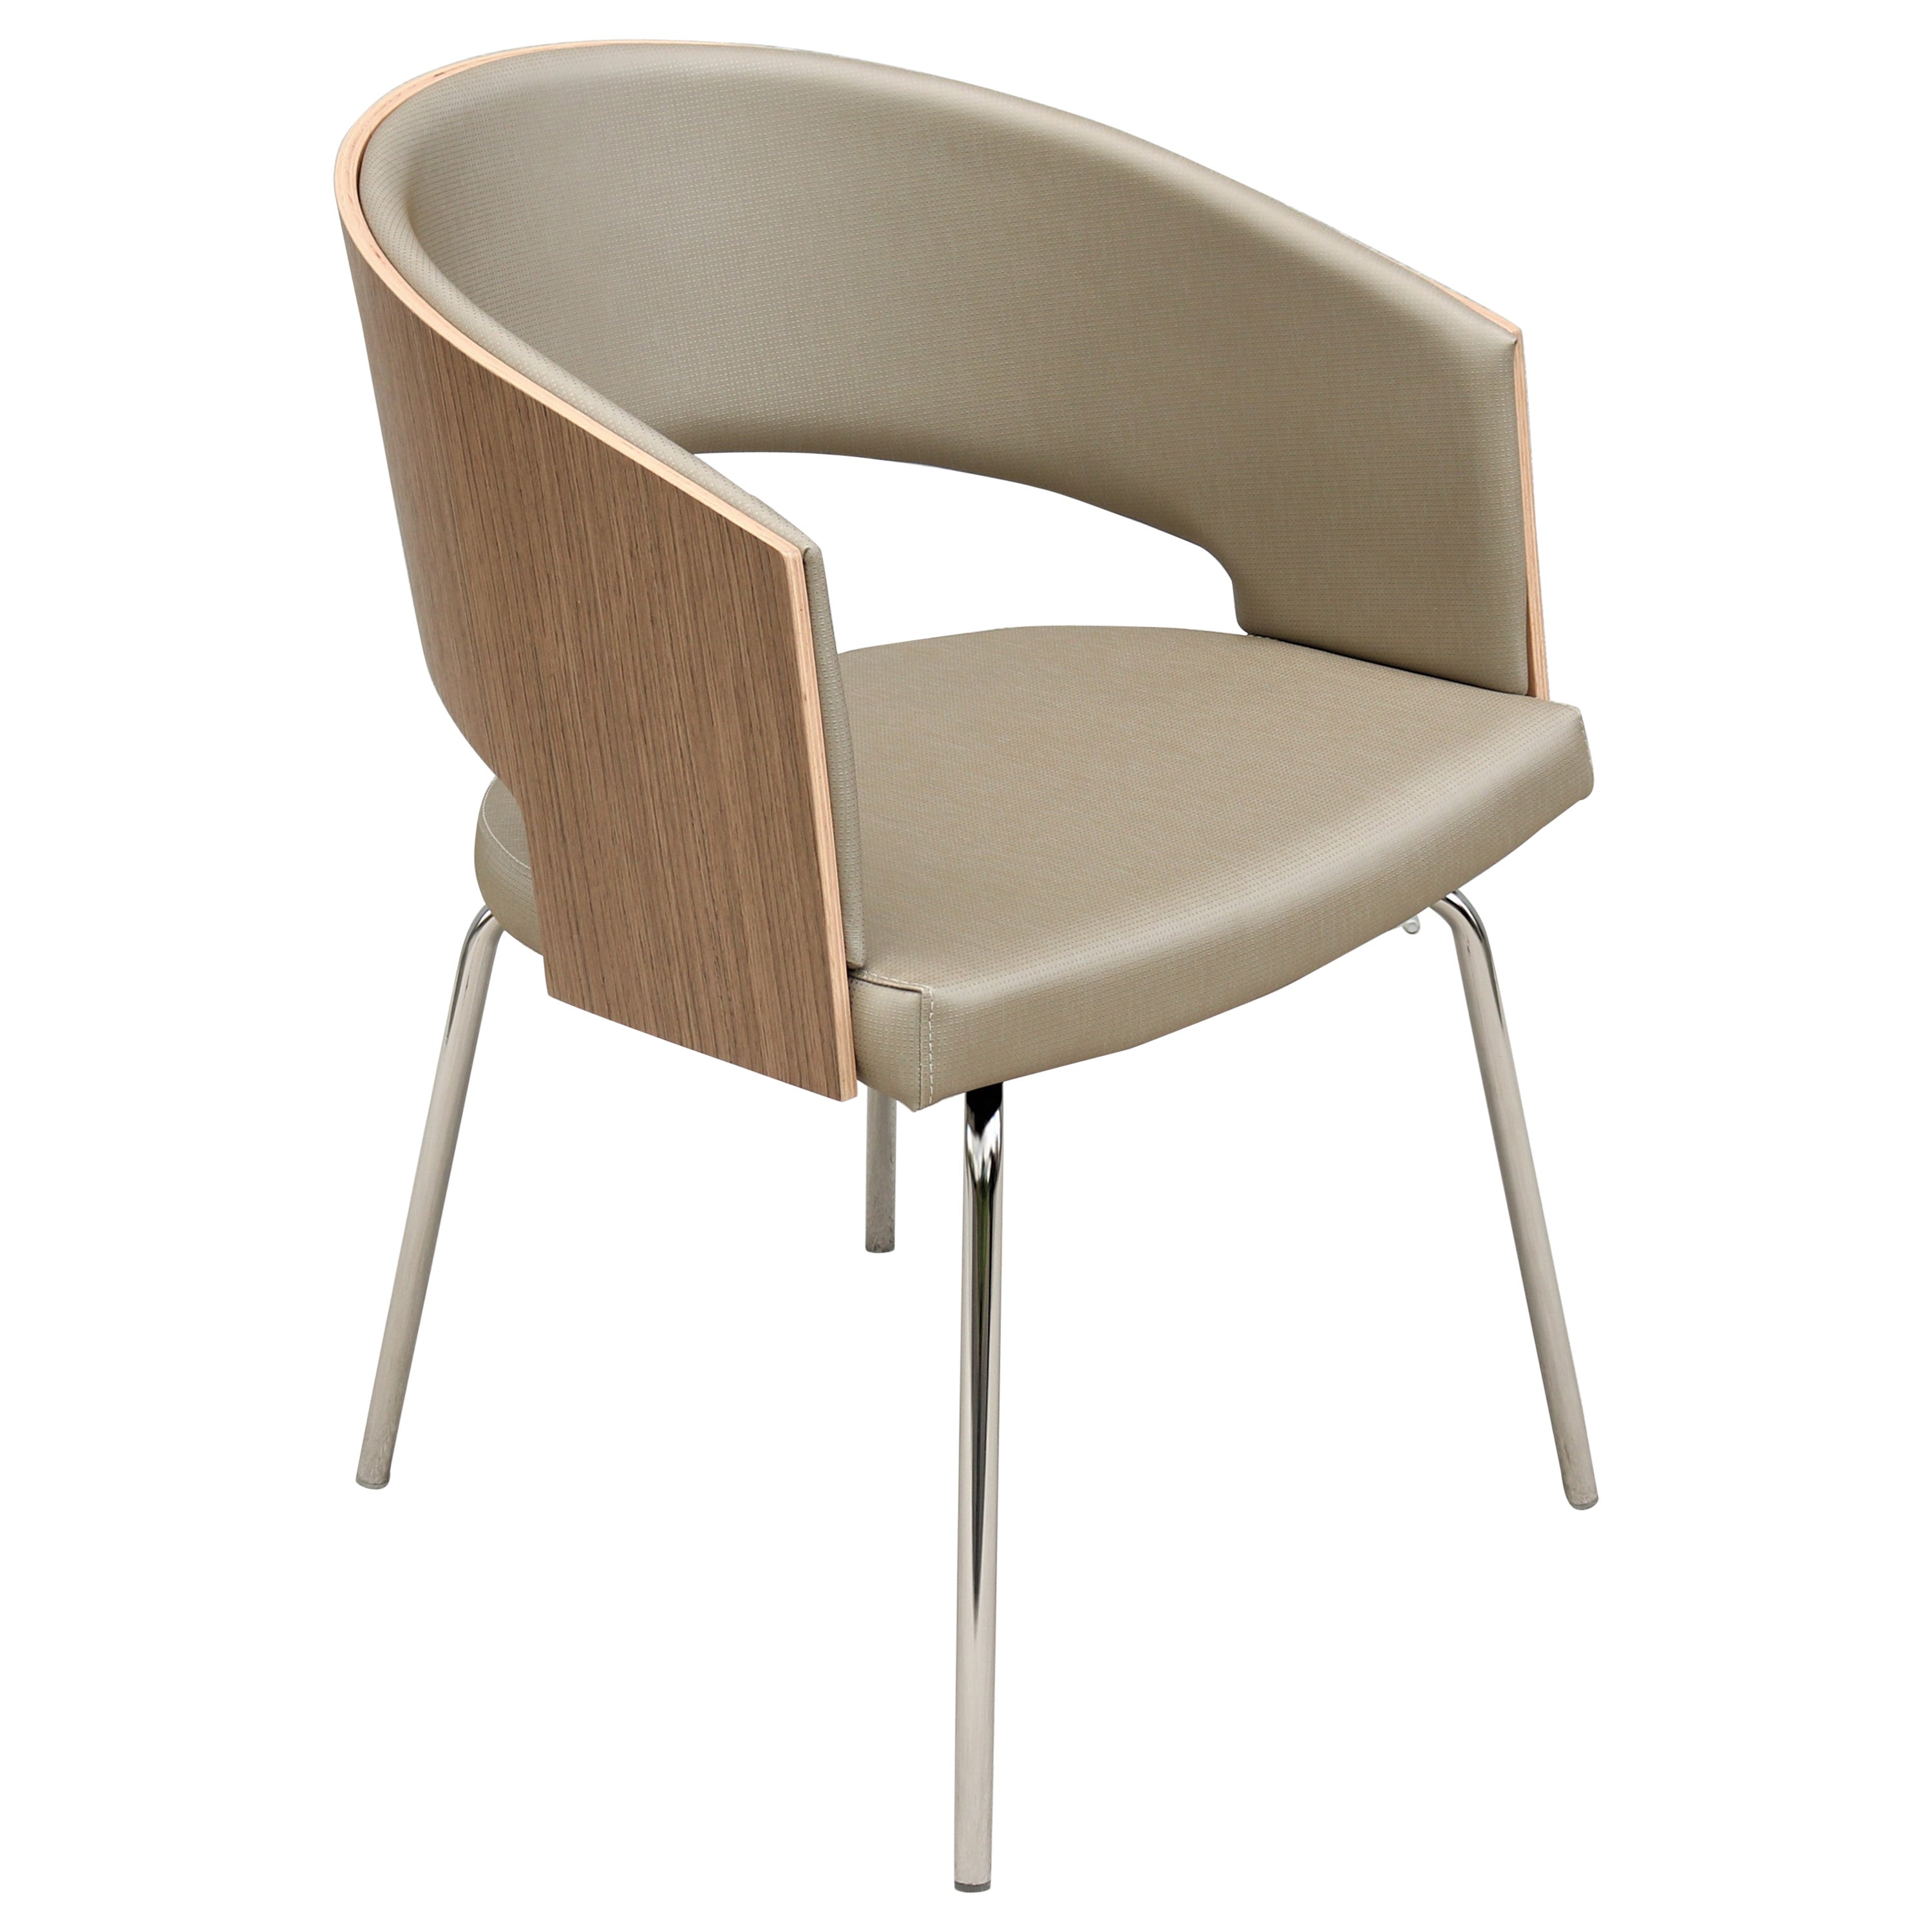 Contemporary Modern Source Botte Multiuse Dining Chair Brand New, 7 Available